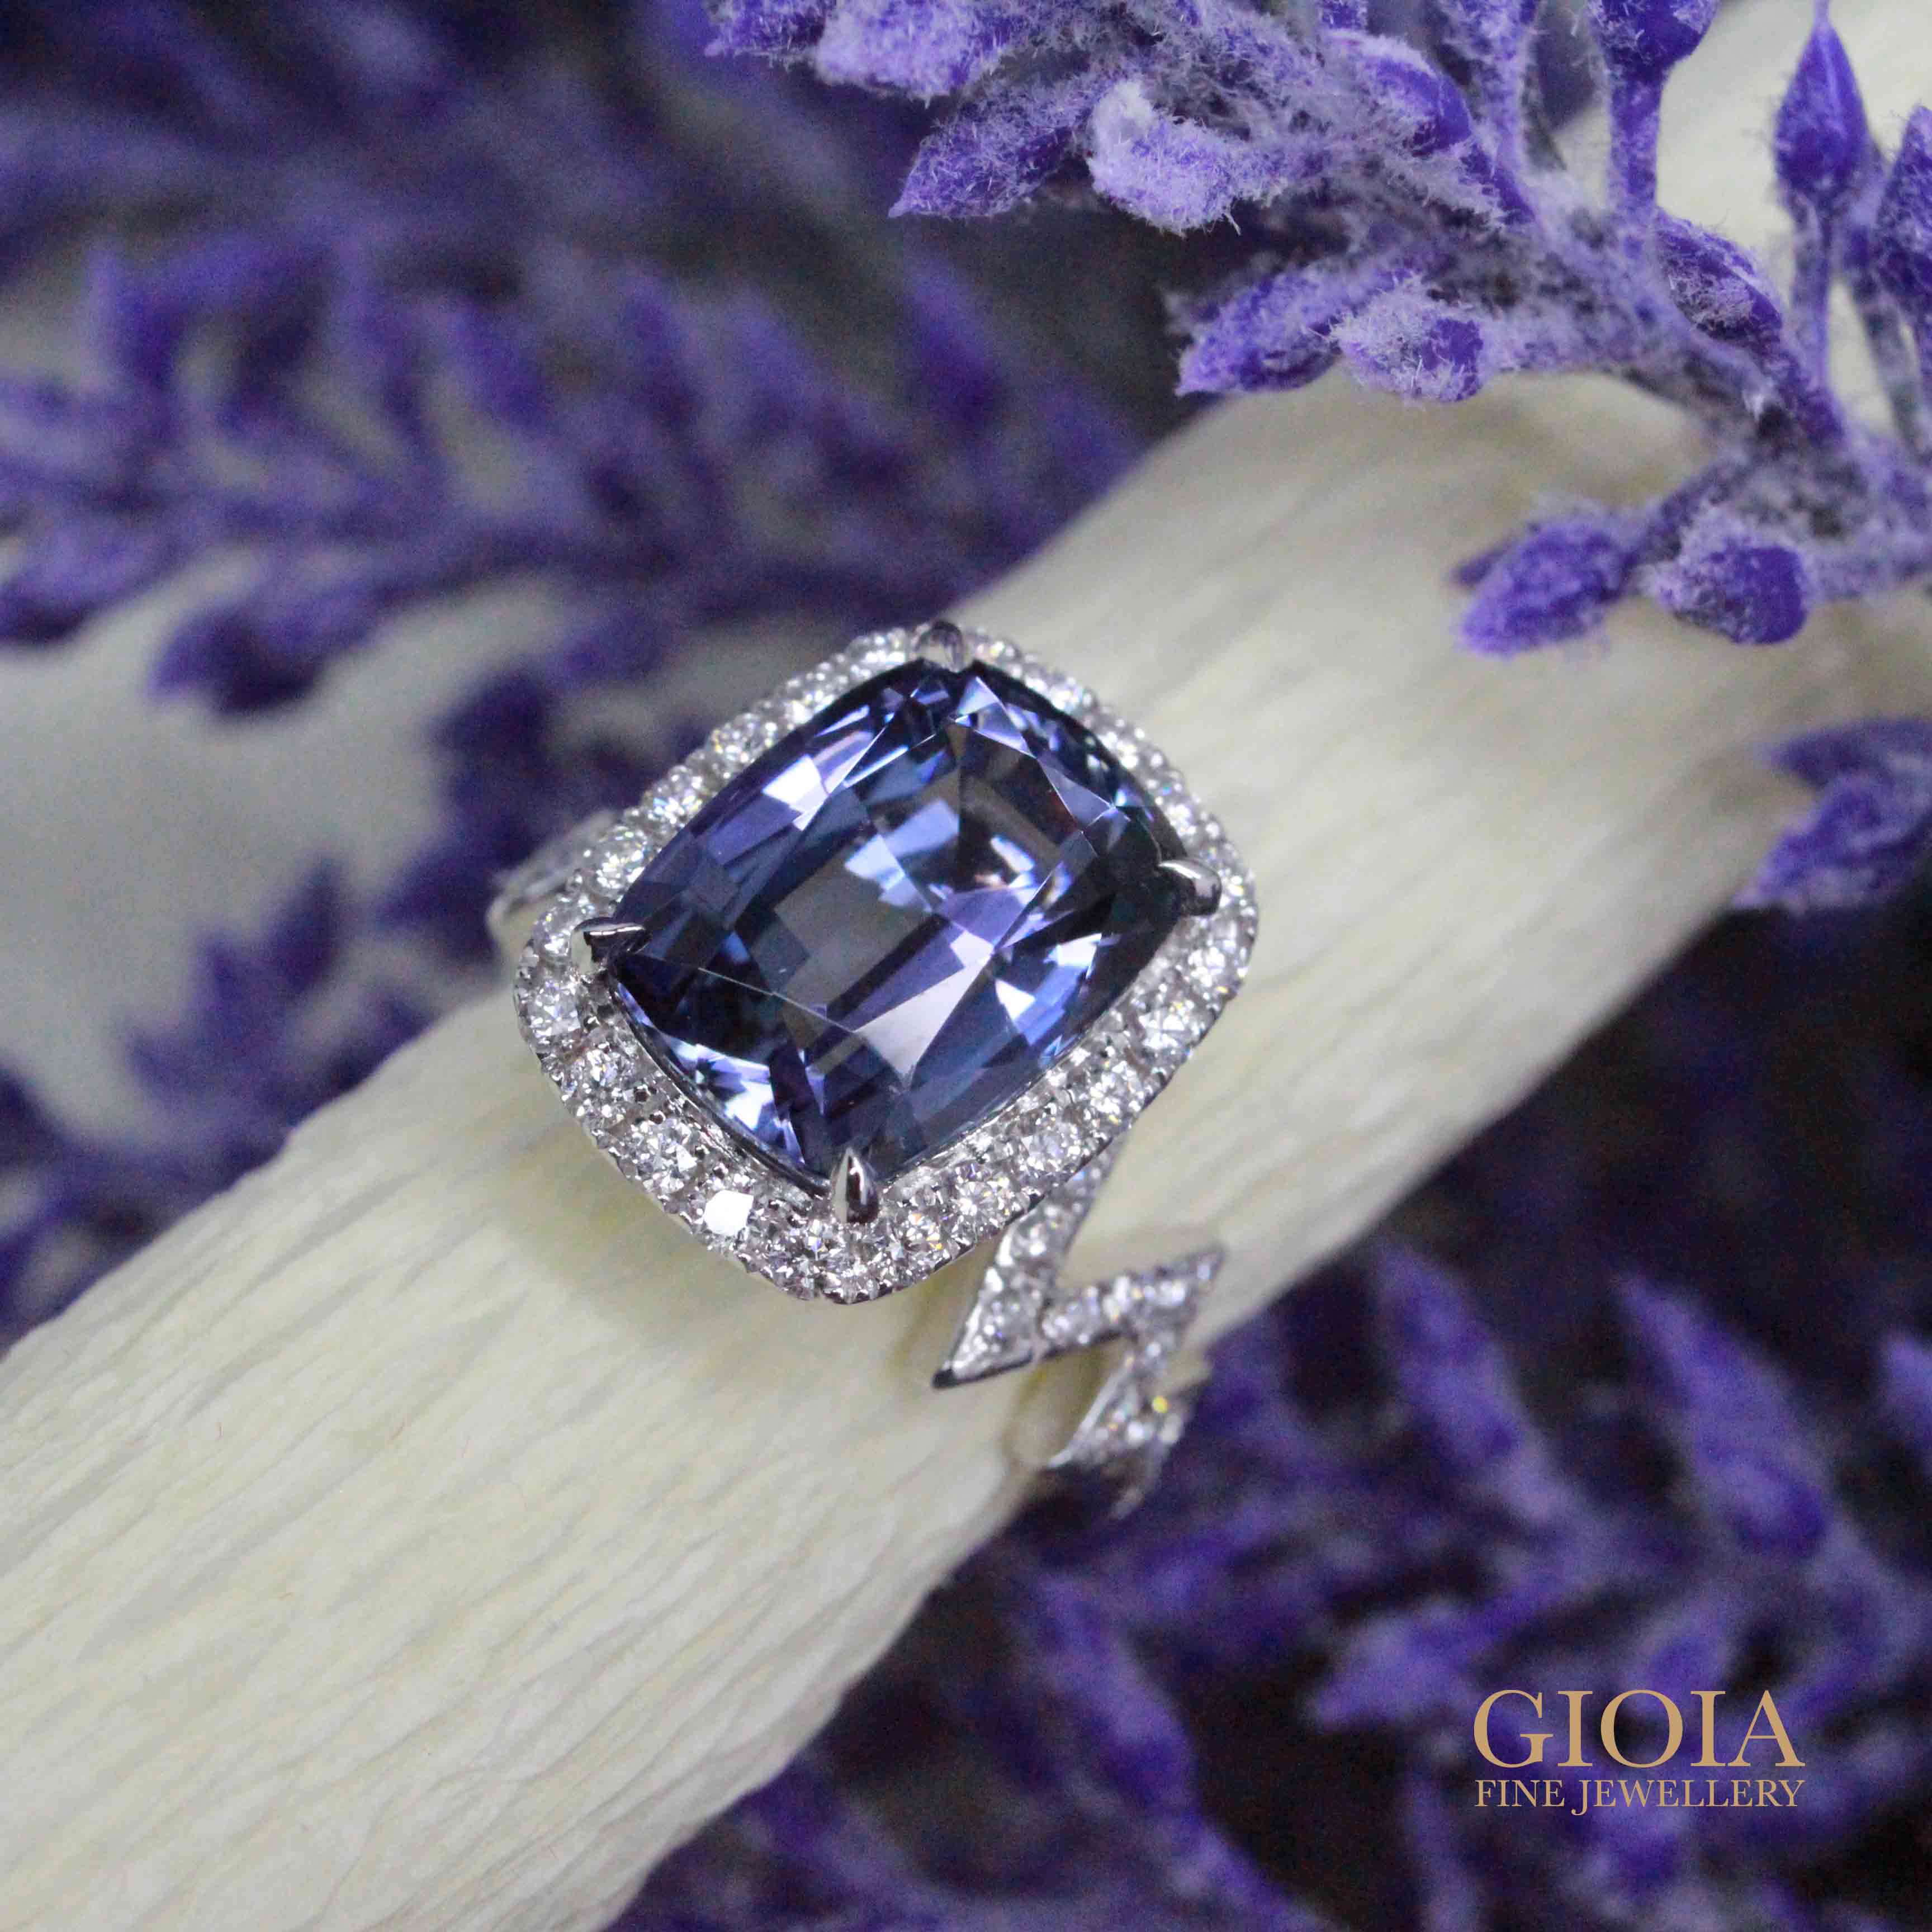 Tanzanite gemstone Halo Zig-zag Ring - Fun cocktail ring to wear? set in unique halo diamond ring | Local Singapore Trusted Customised Jeweller